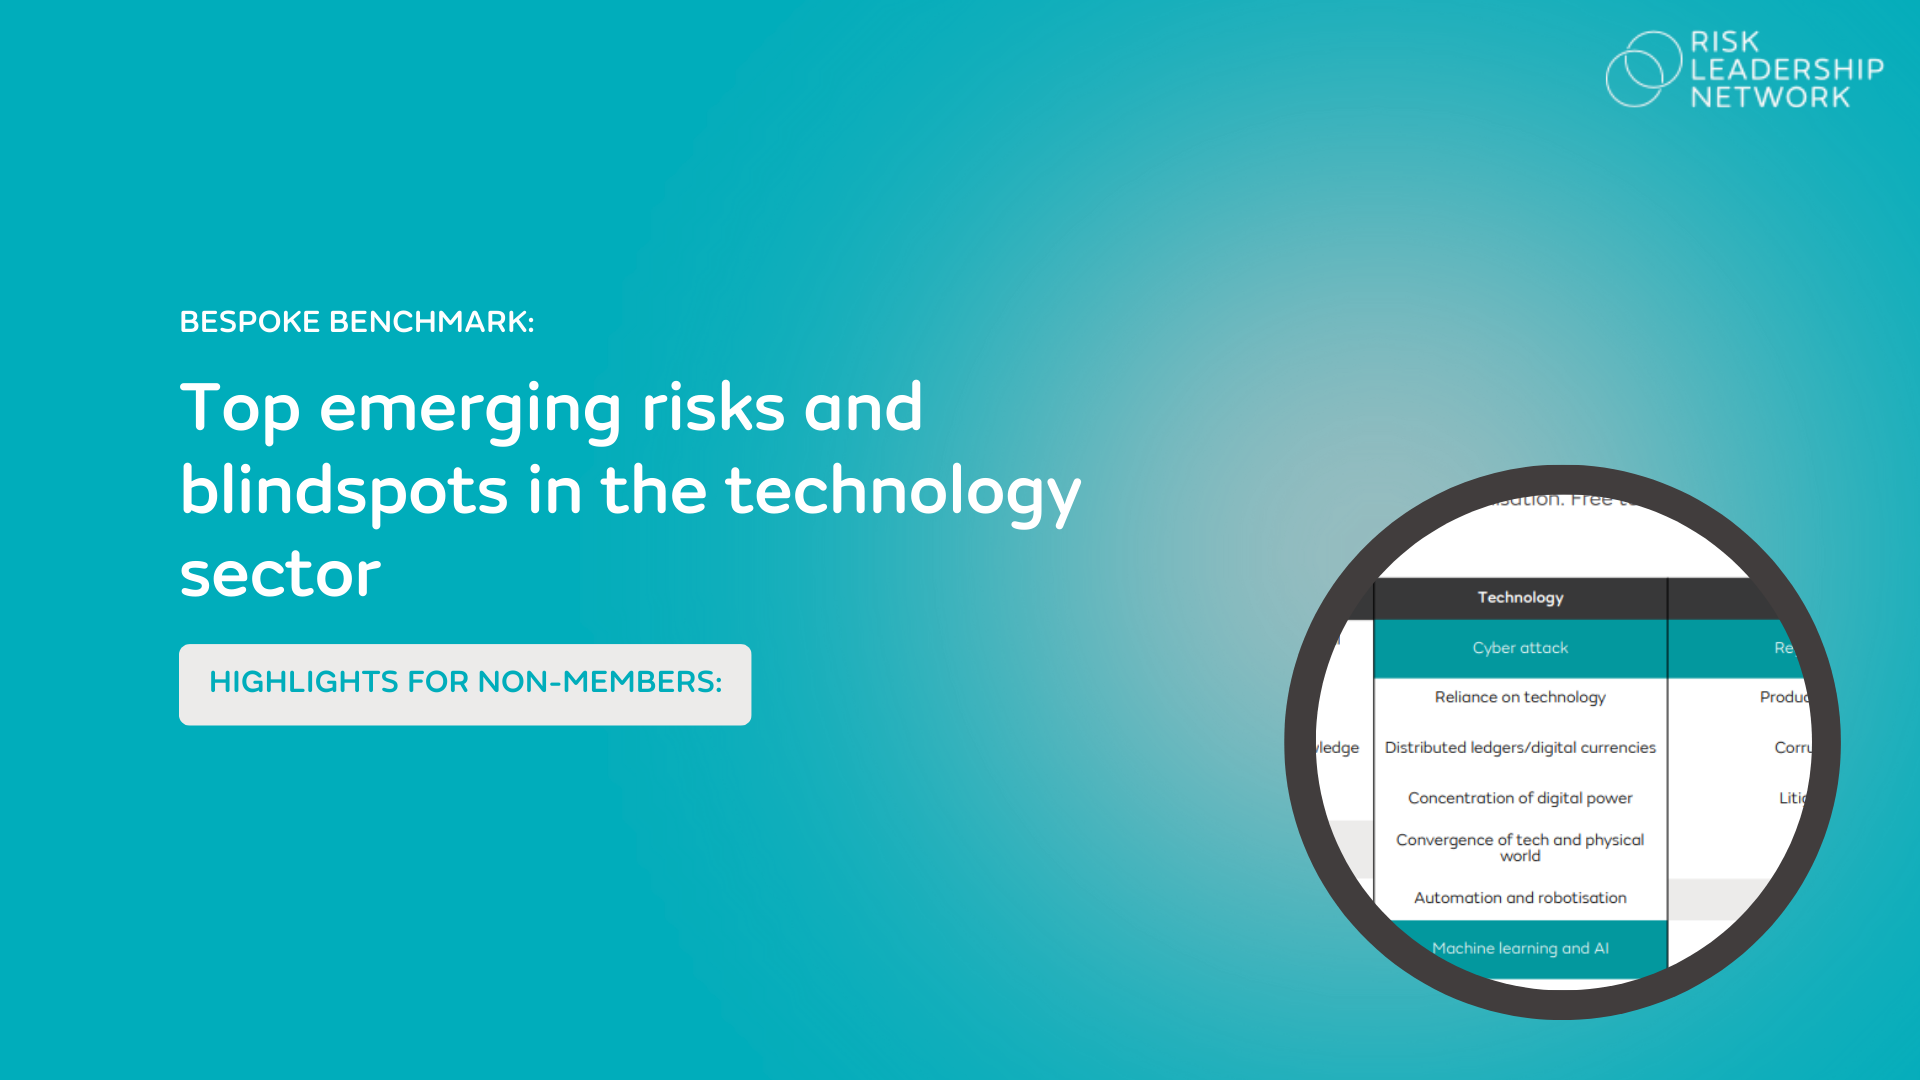 RLN_Top_emerging_risks_and_blindspots_in_the_technology_sector 